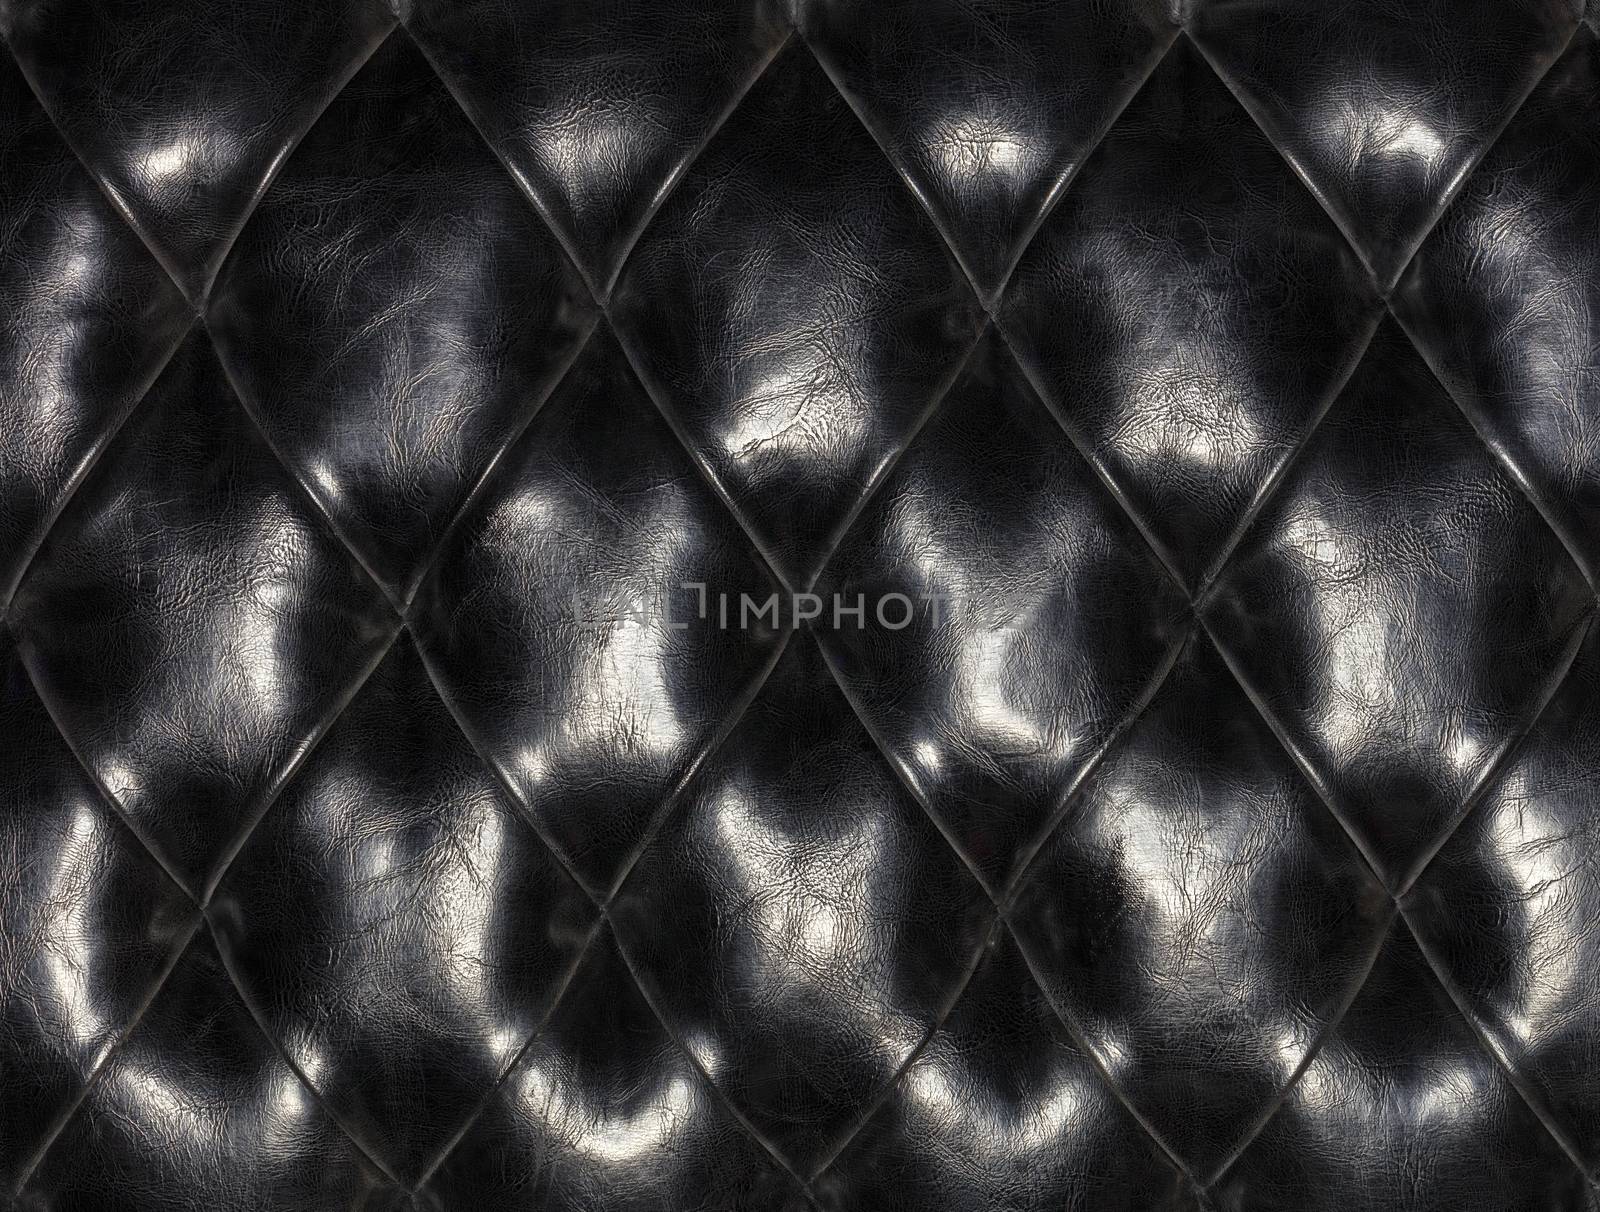 Old black leather furniture background and texture stitched together in a diamond shape.